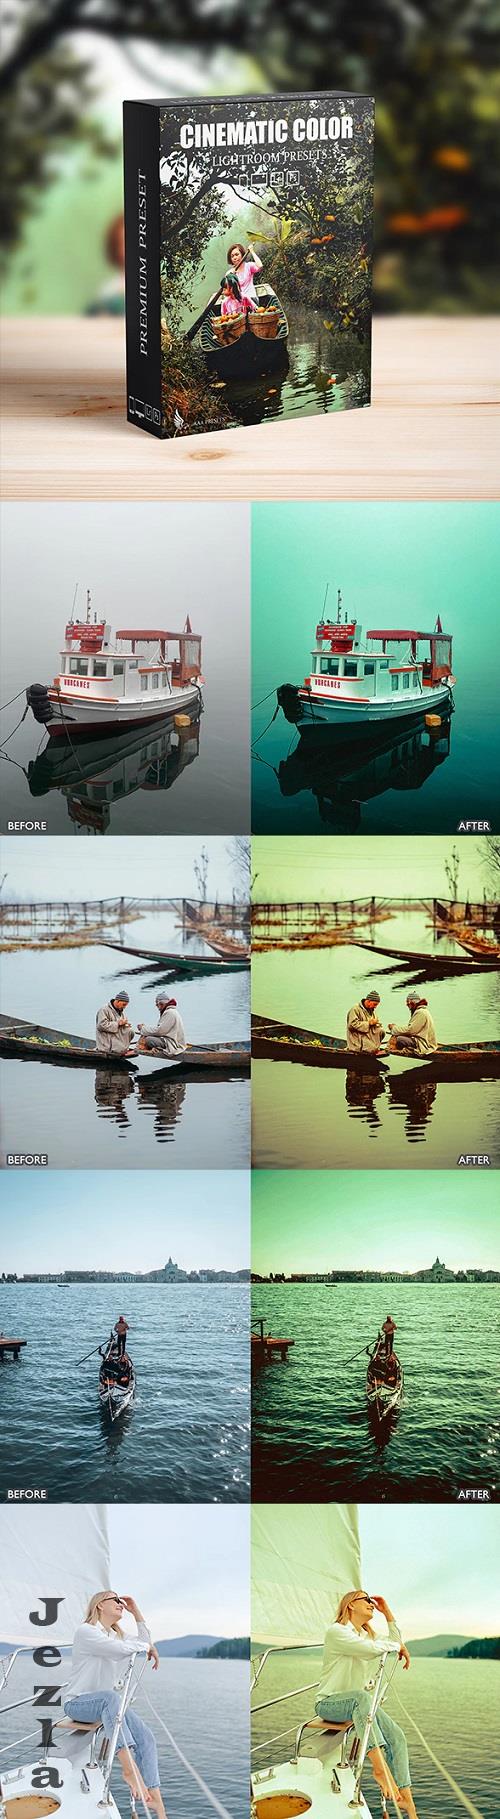 Dramatic & Cinematic Moody Look Lightroom Presets For Mobile and Desktop - 47972931